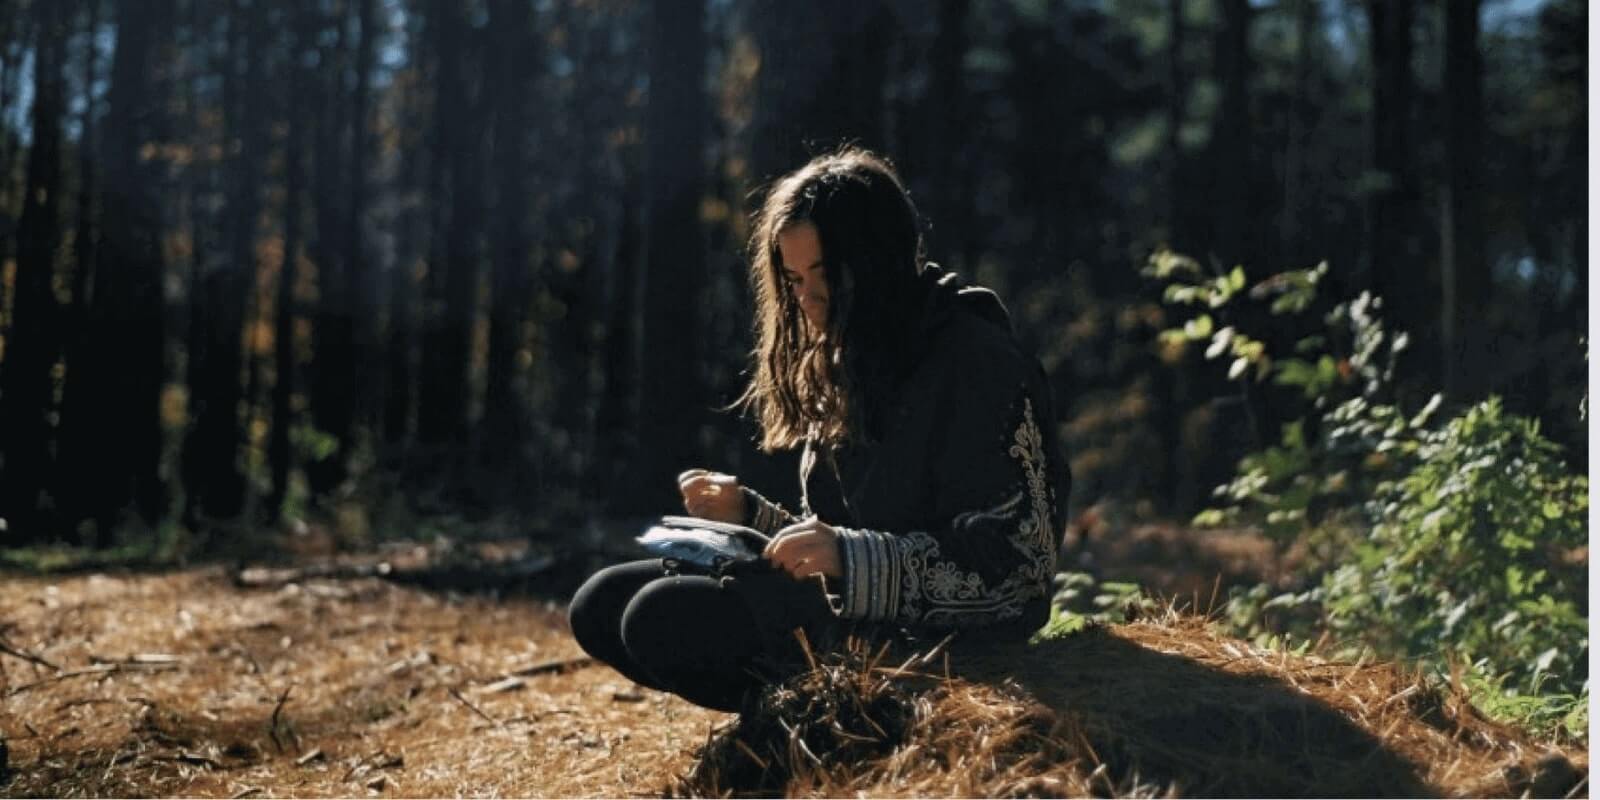 A girl holding cigarette in one hand and a bird on her lap in the woods